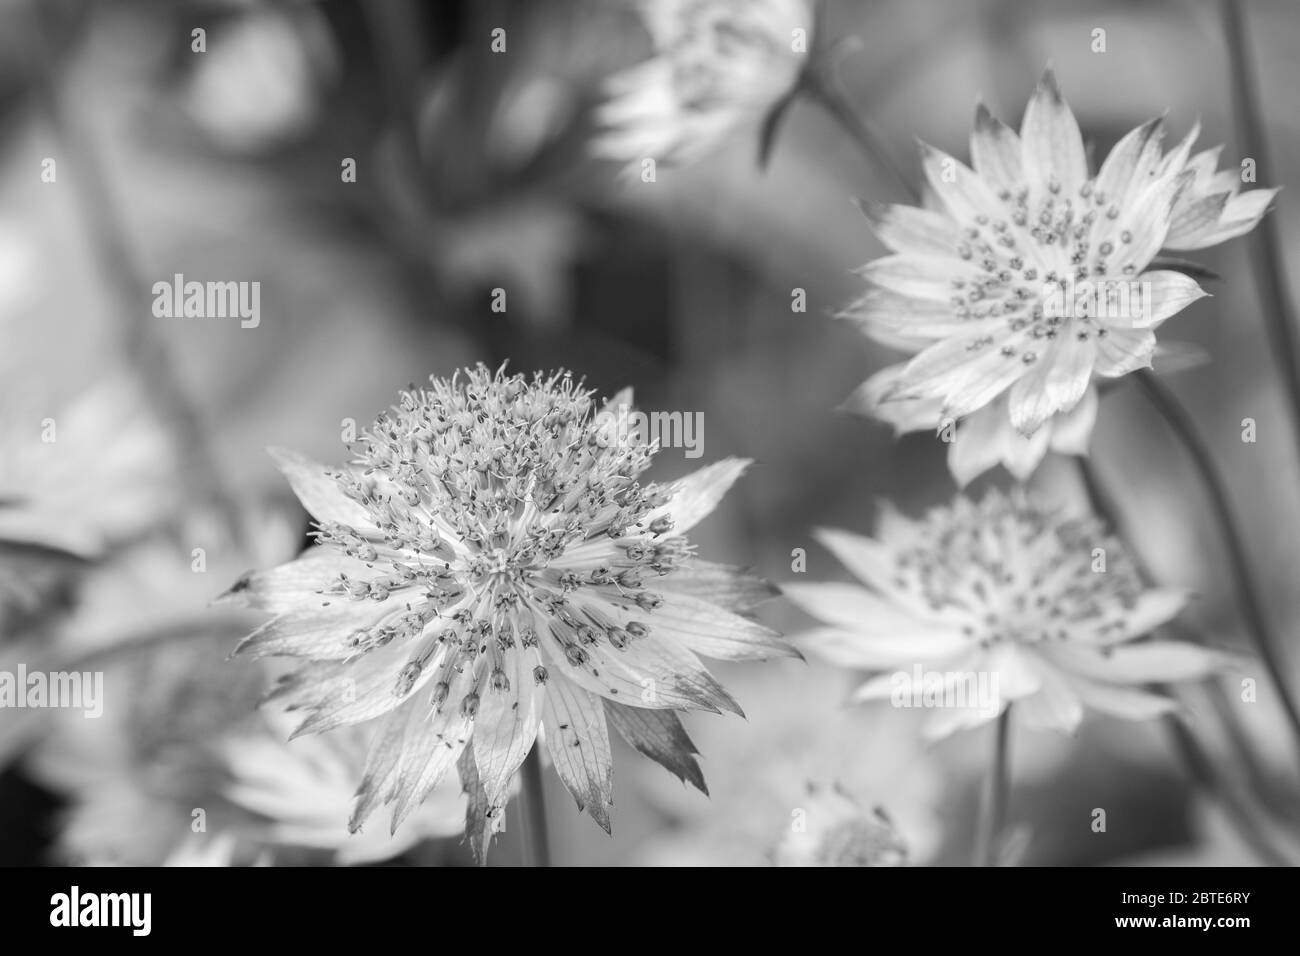 Star shaped Astrantia flowers with an out of focus background,these flowers are also known as Hattie's pincushion or masterwort. Stock Photo